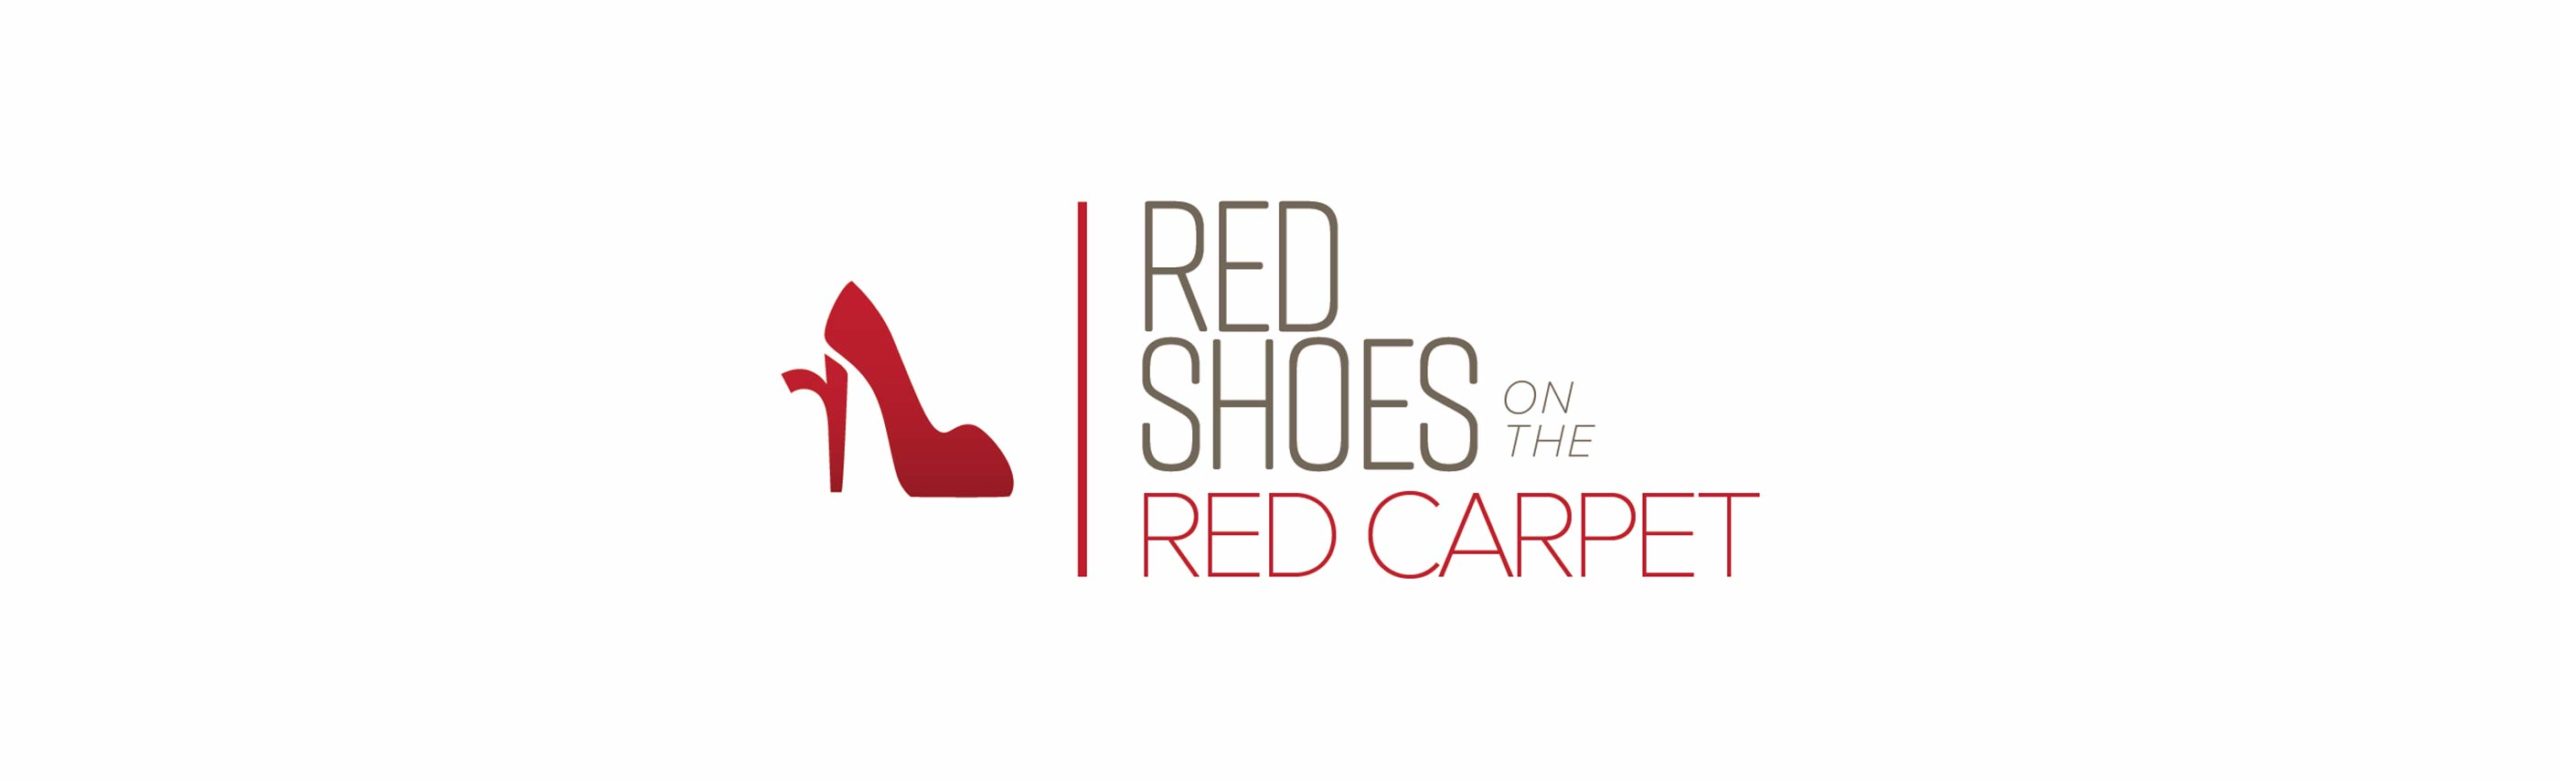 Red Shoes on the Red Carpet